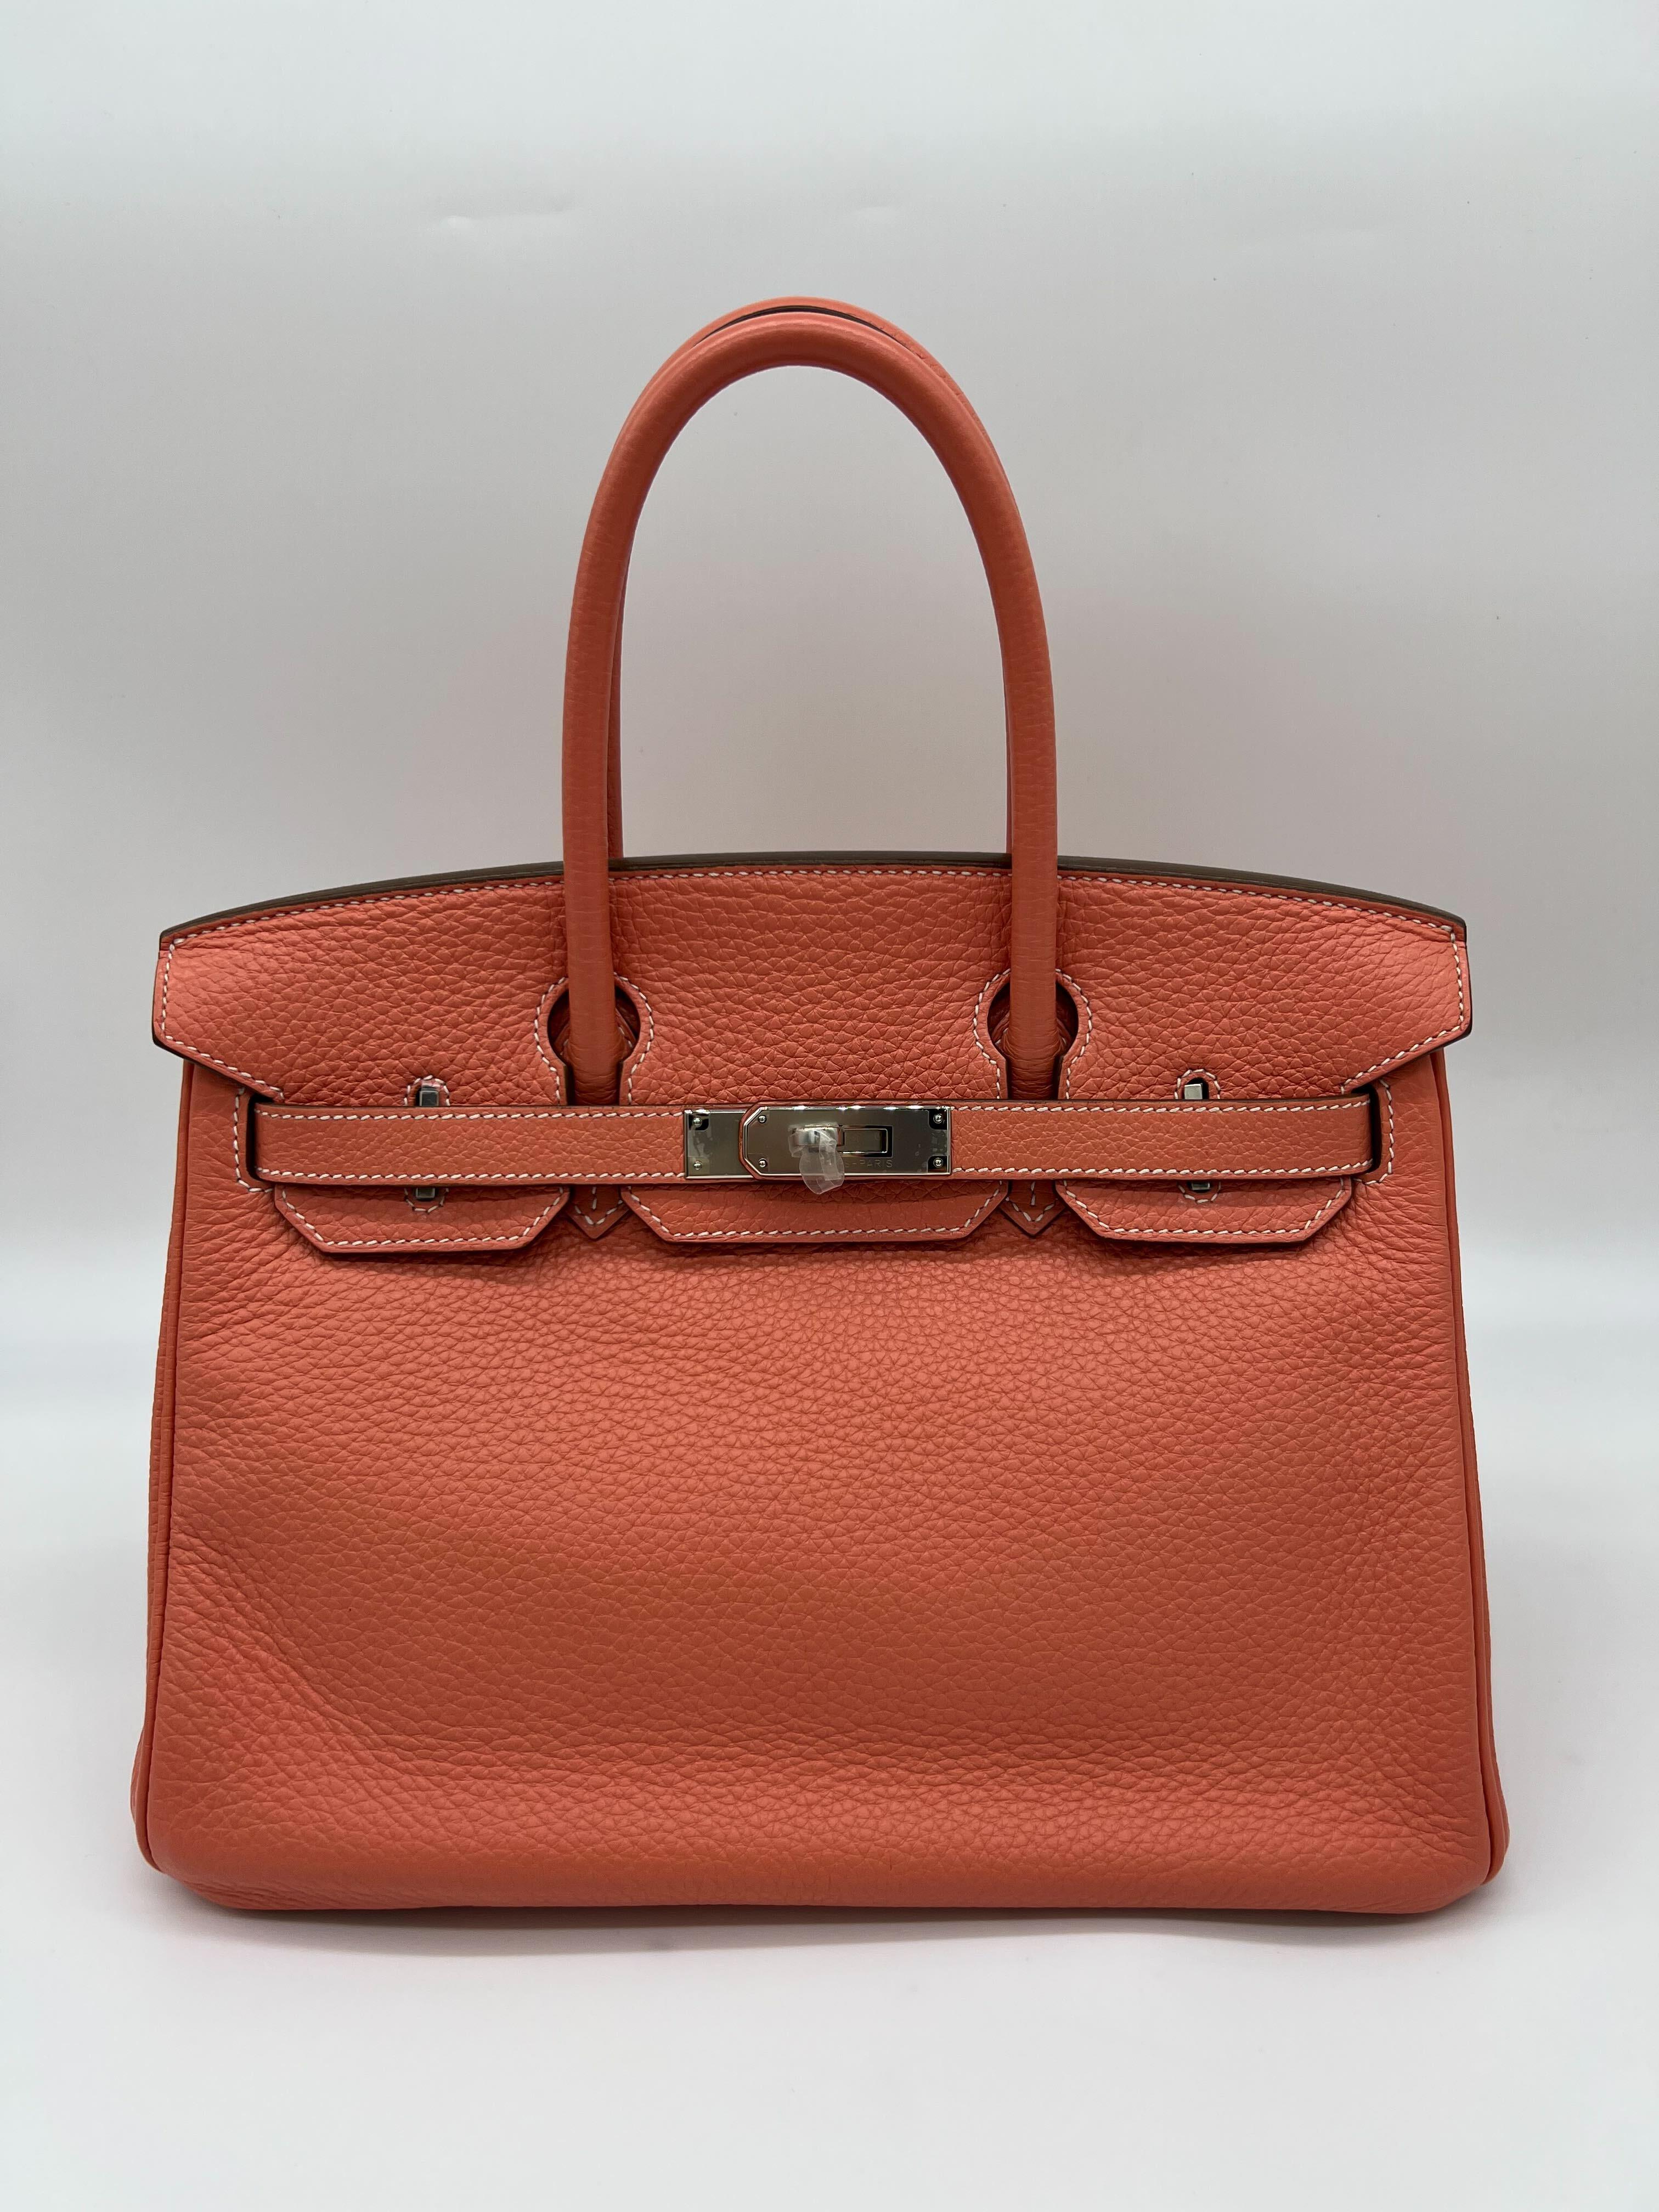 Hermes Birkin 30 Crevette Togo Leather Palladium Hardware

Condition: Pre-owned 
Measurements: (W)30cm × (H)22cm × (D)16cm
Bag Material: Togo Leather
Hardware Material: Palladium plated
 
*Comes with full original packaging. 
*Includes original